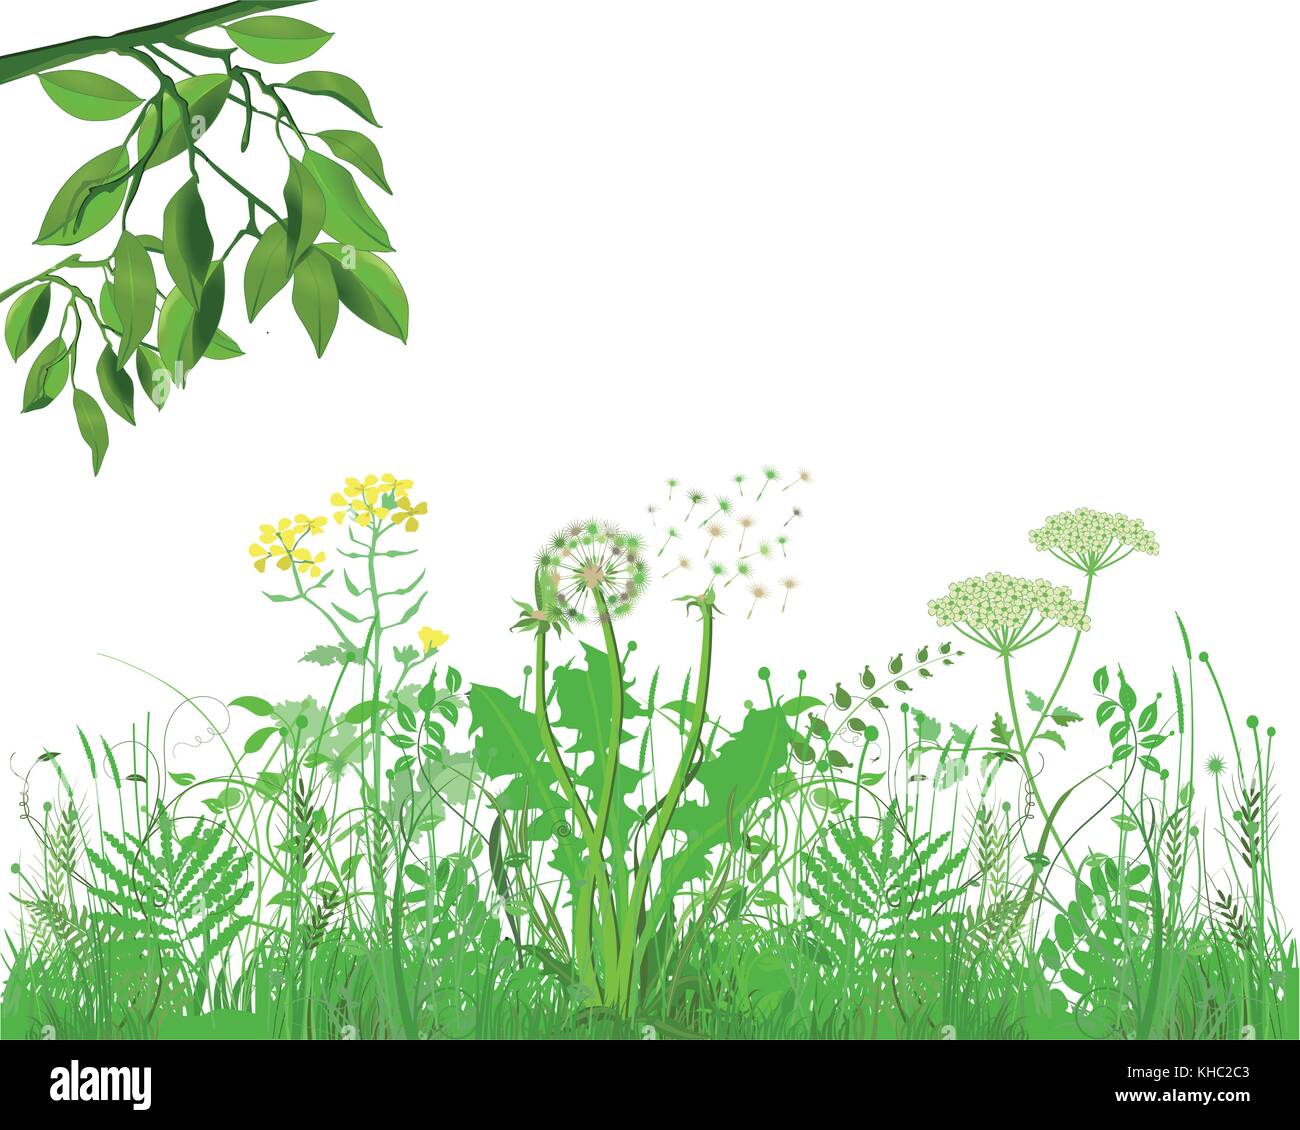 Grasses with herbs and flowers, Illustration Stock Vector